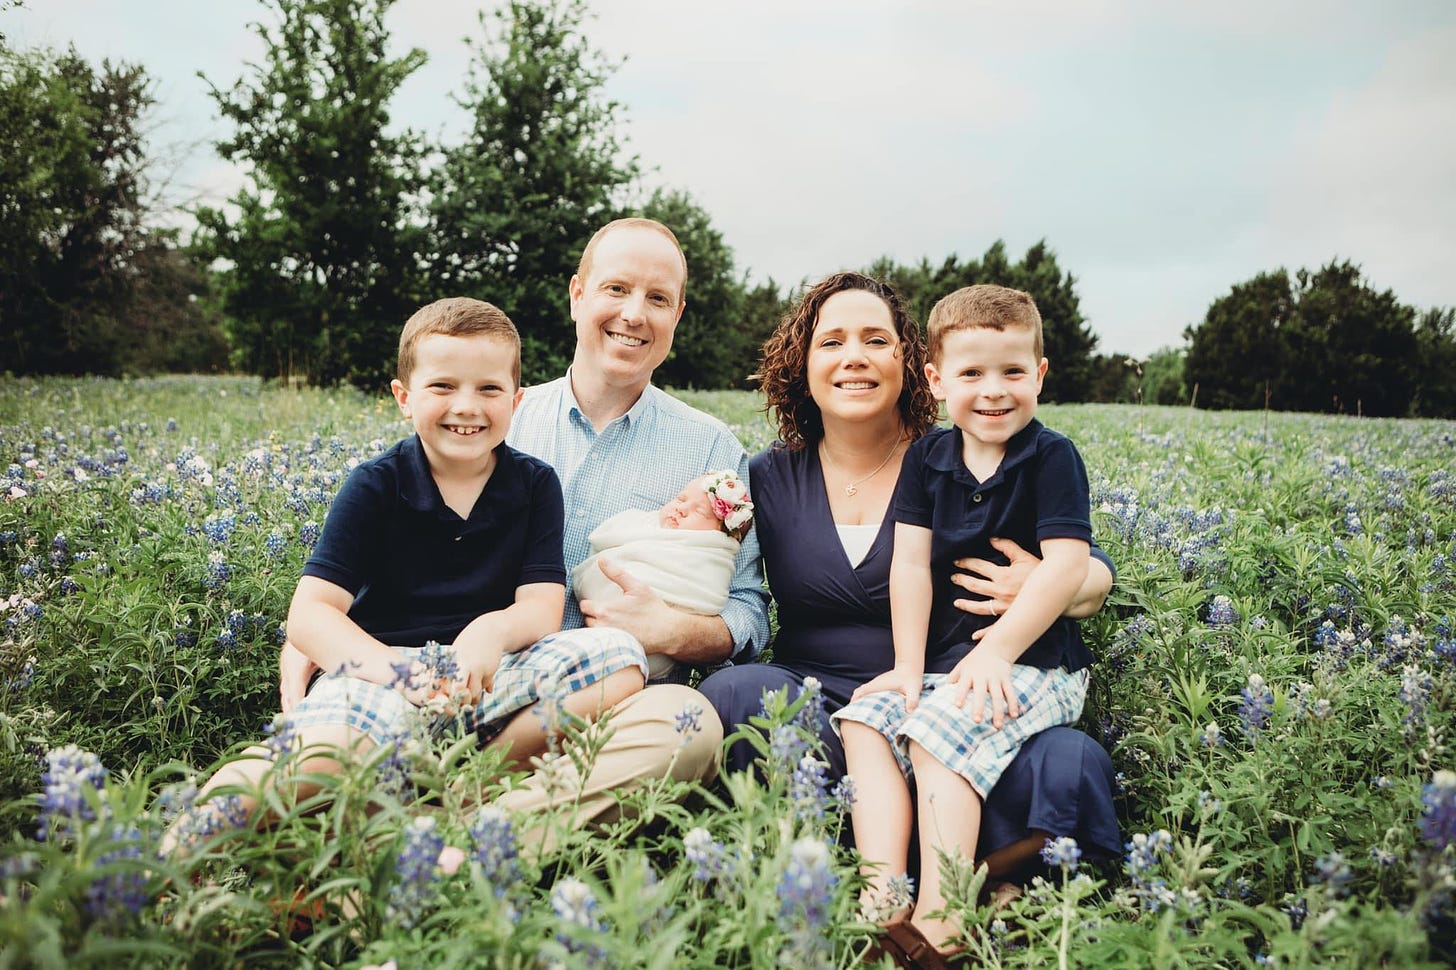 May be an image of 3 people, people standing, Texas bluebonnet and nature